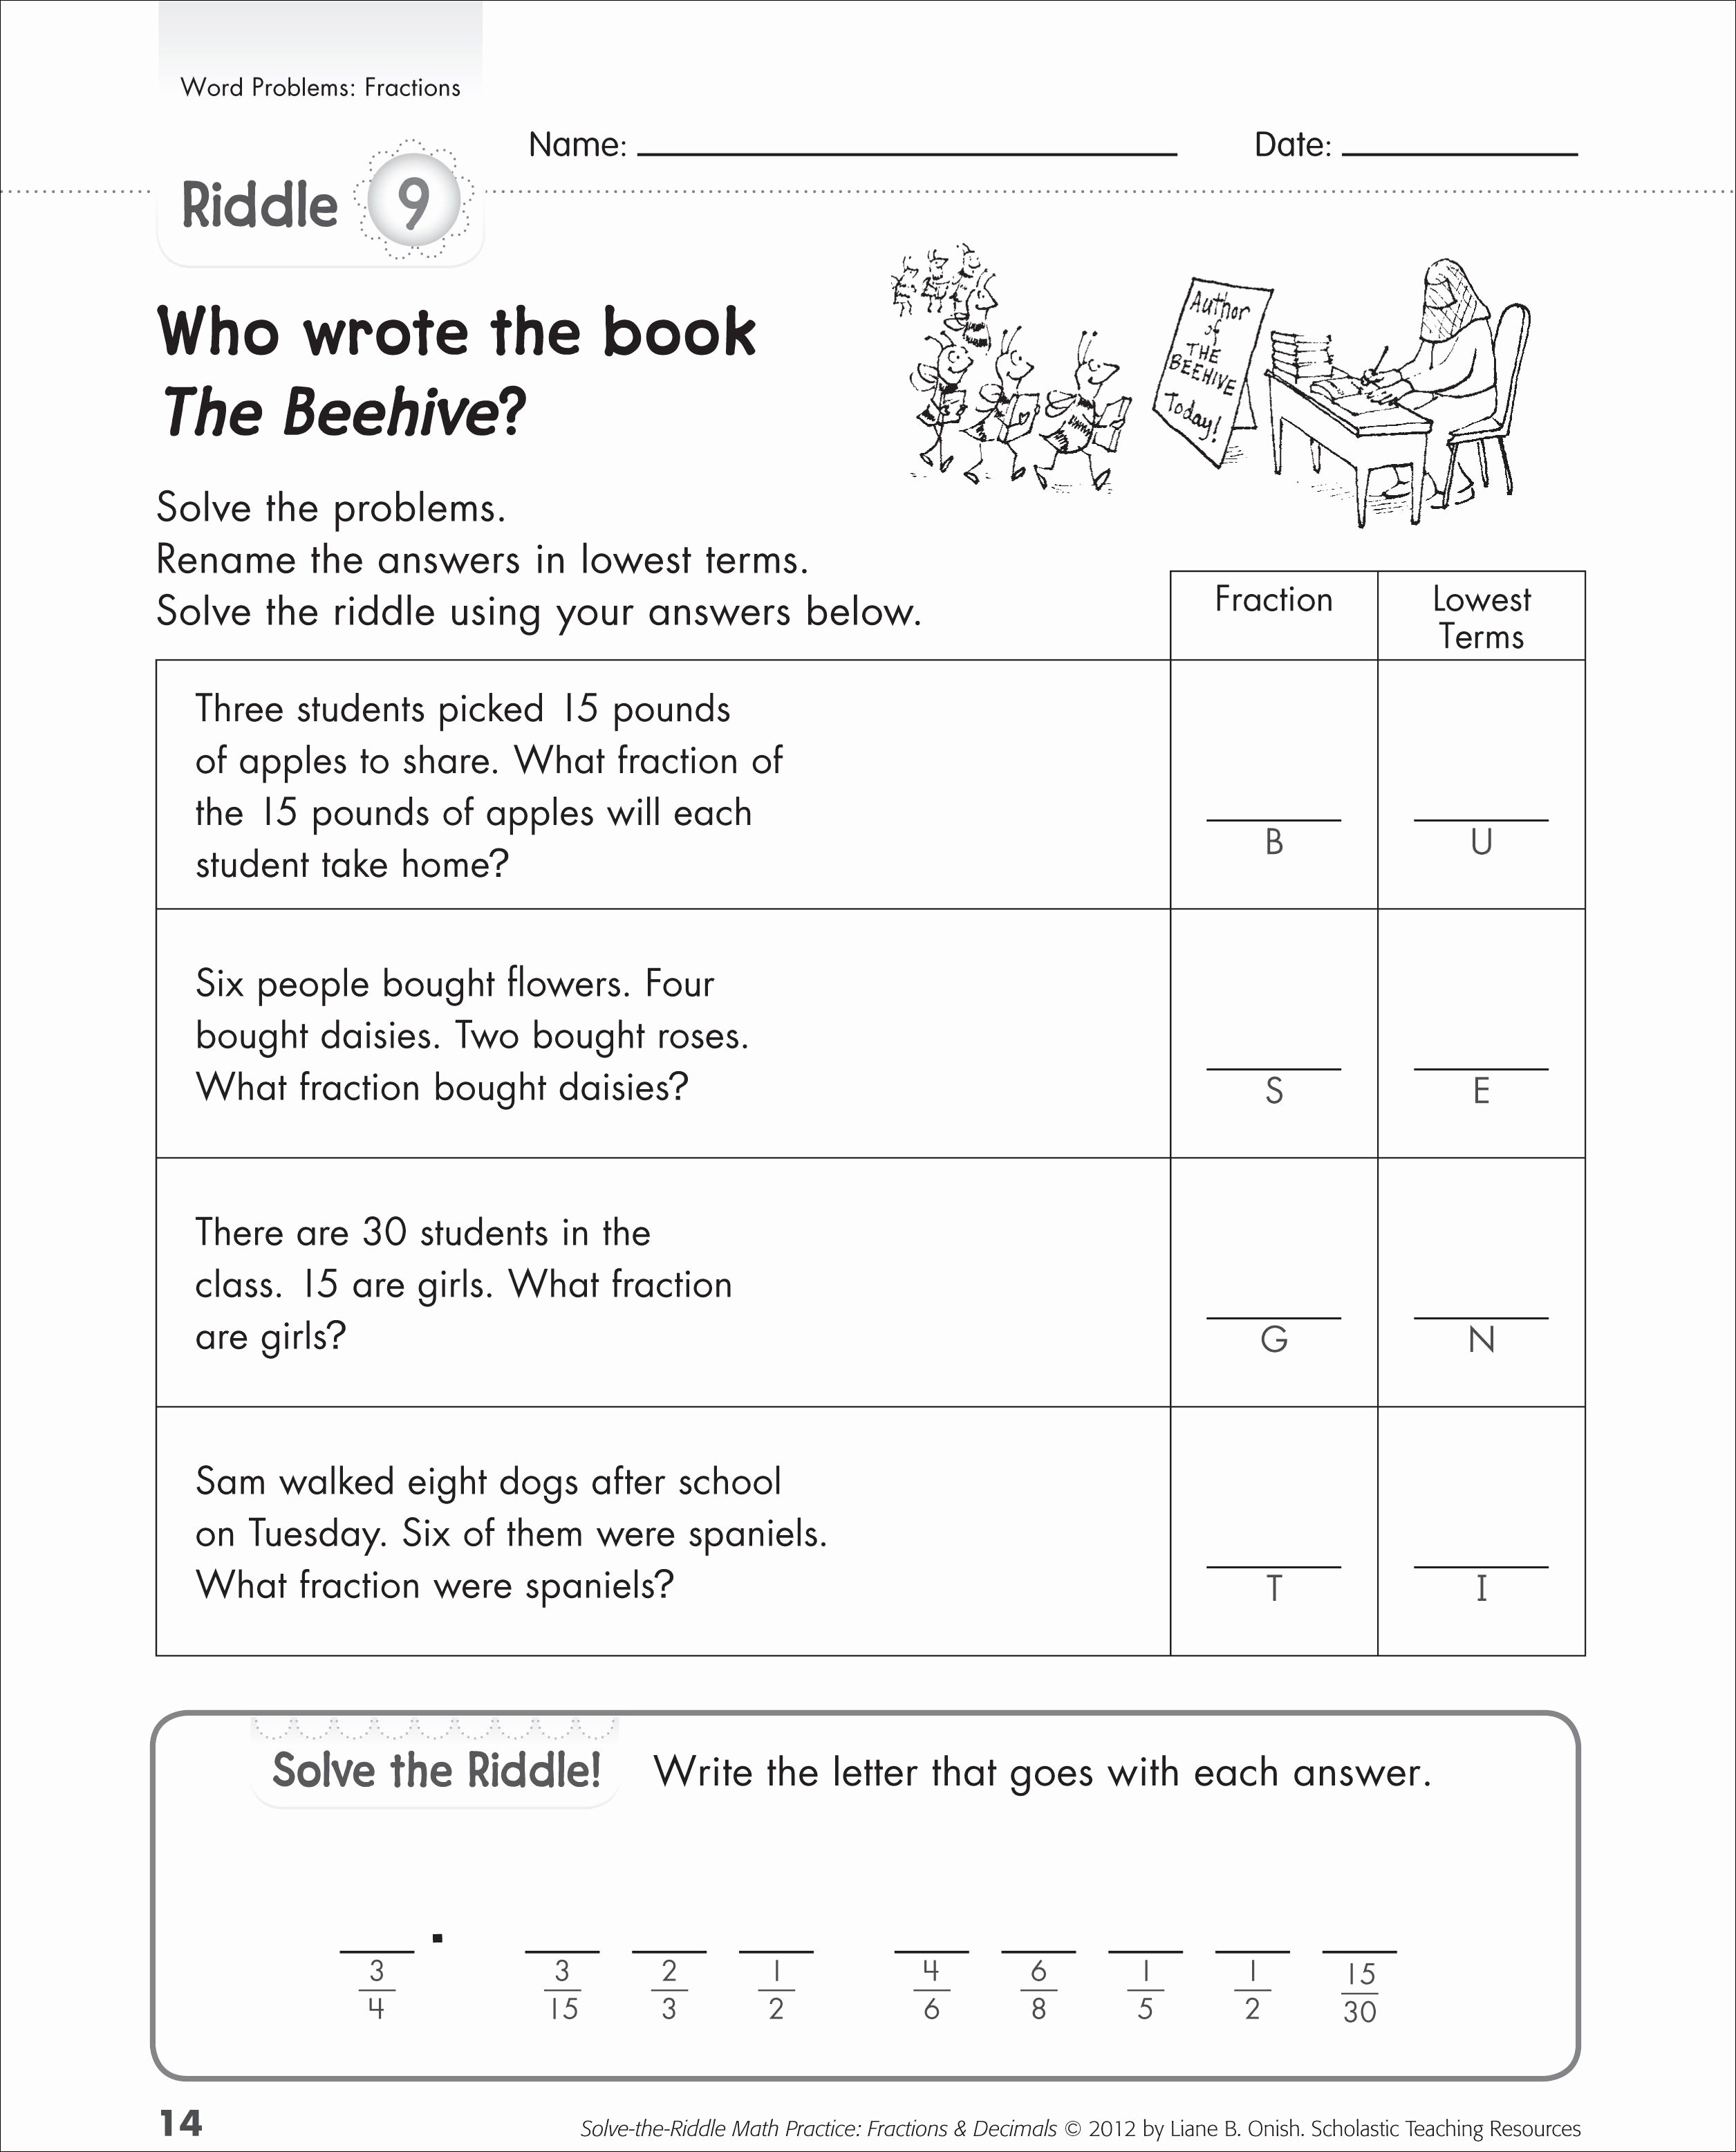 Dividing Fractions Word Problems Worksheet Inspirational Help Your Kids Learn Fractions with these Word Problems